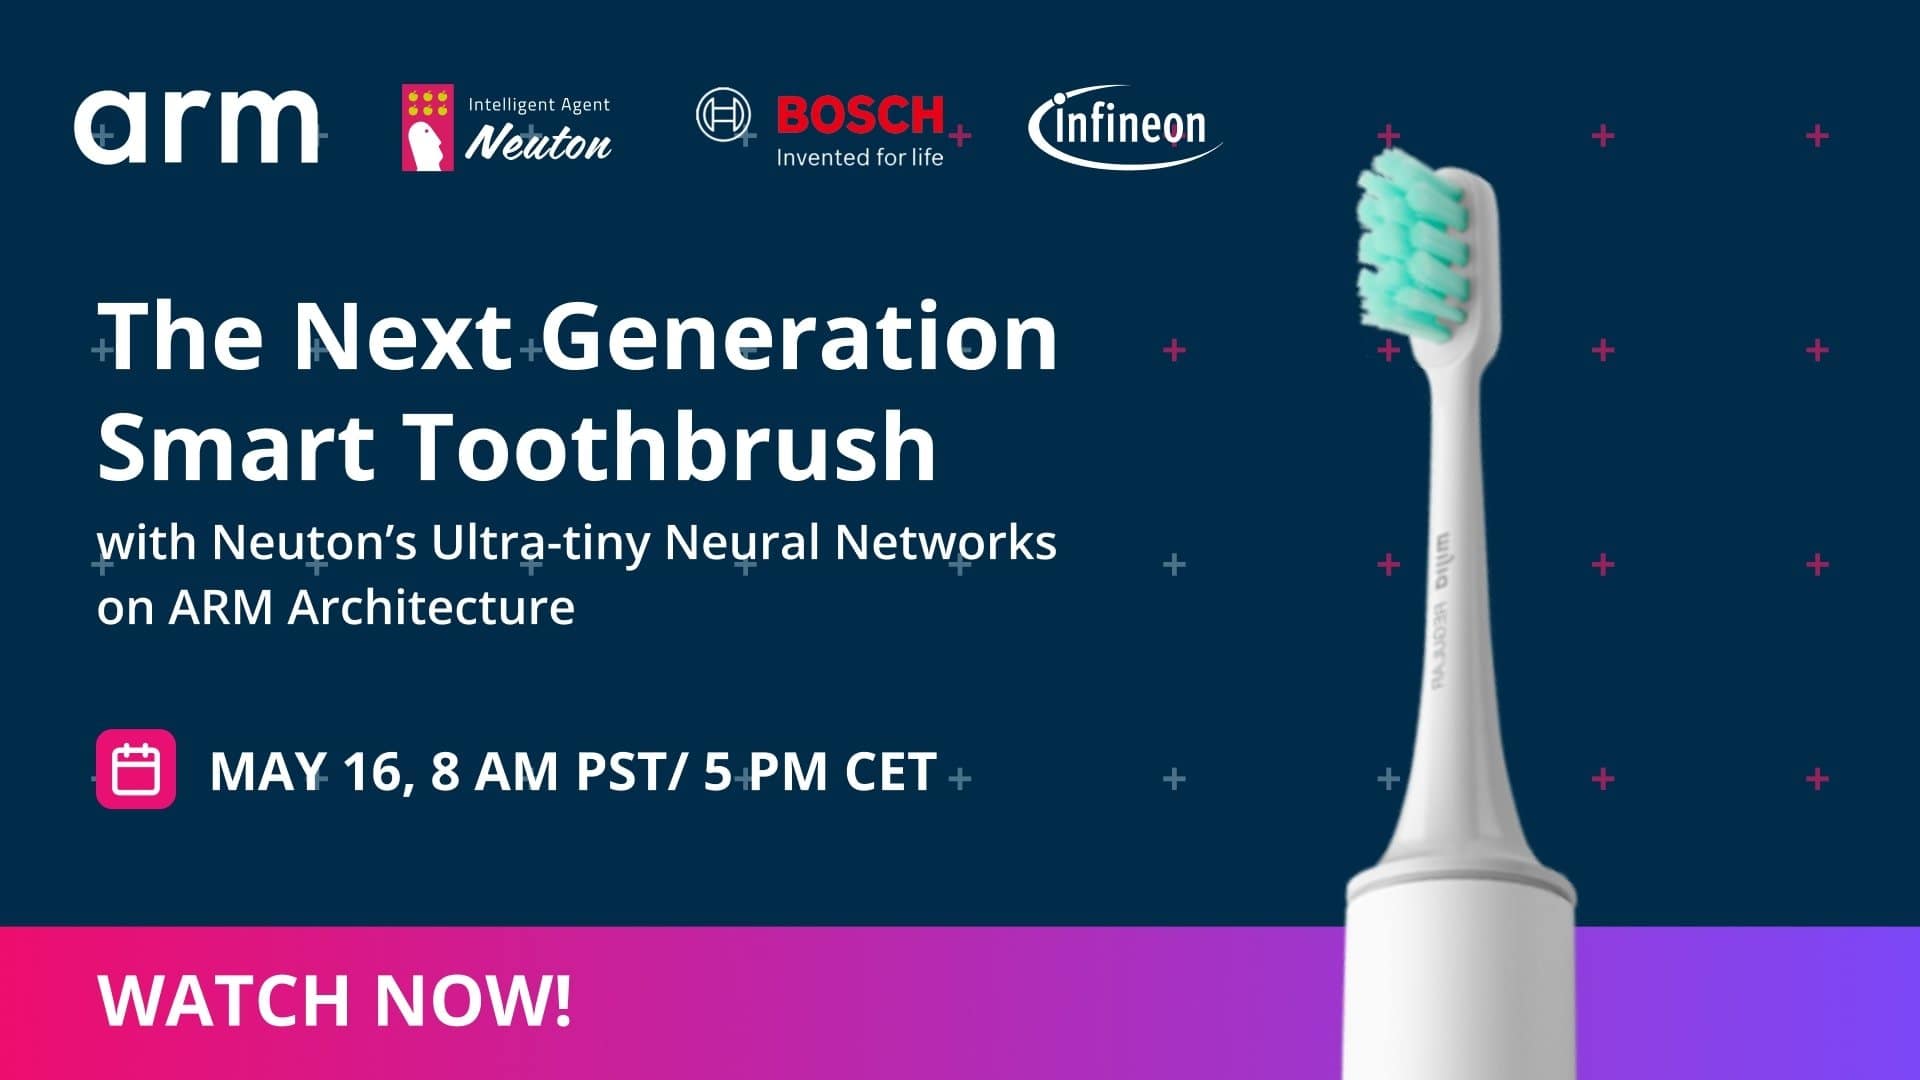 Arm Tech Talk 2023: The Next Generation Smart Toothbrush - Watch now!